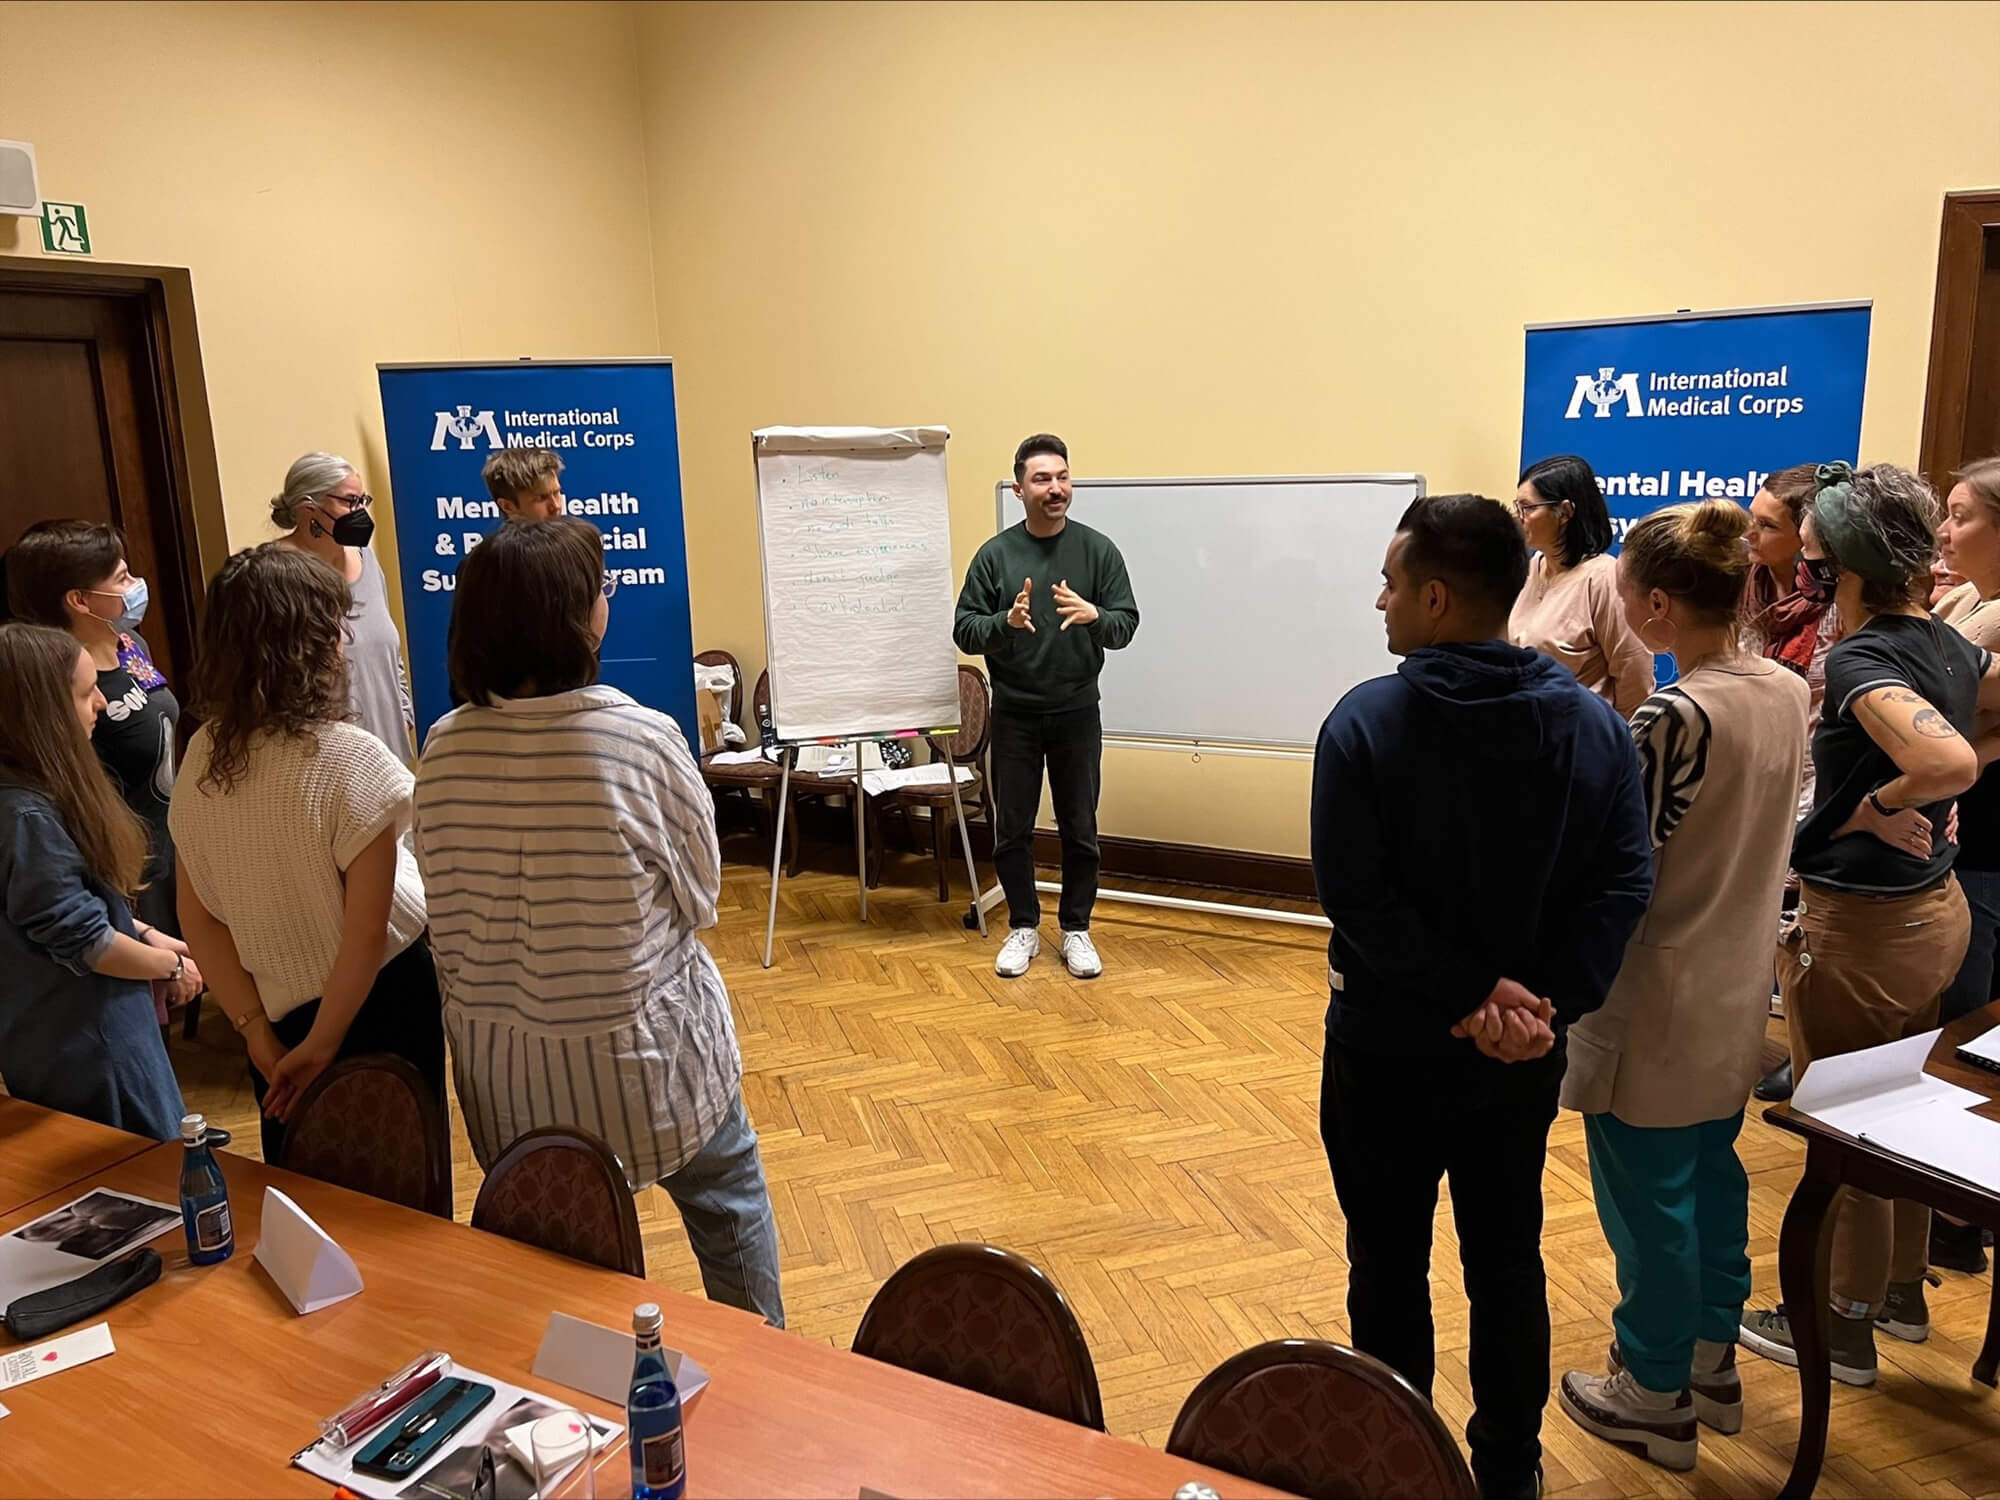 An International Medical Corps Consultant provides training in psychological first aid (PFA) to frontline workers in Poland.